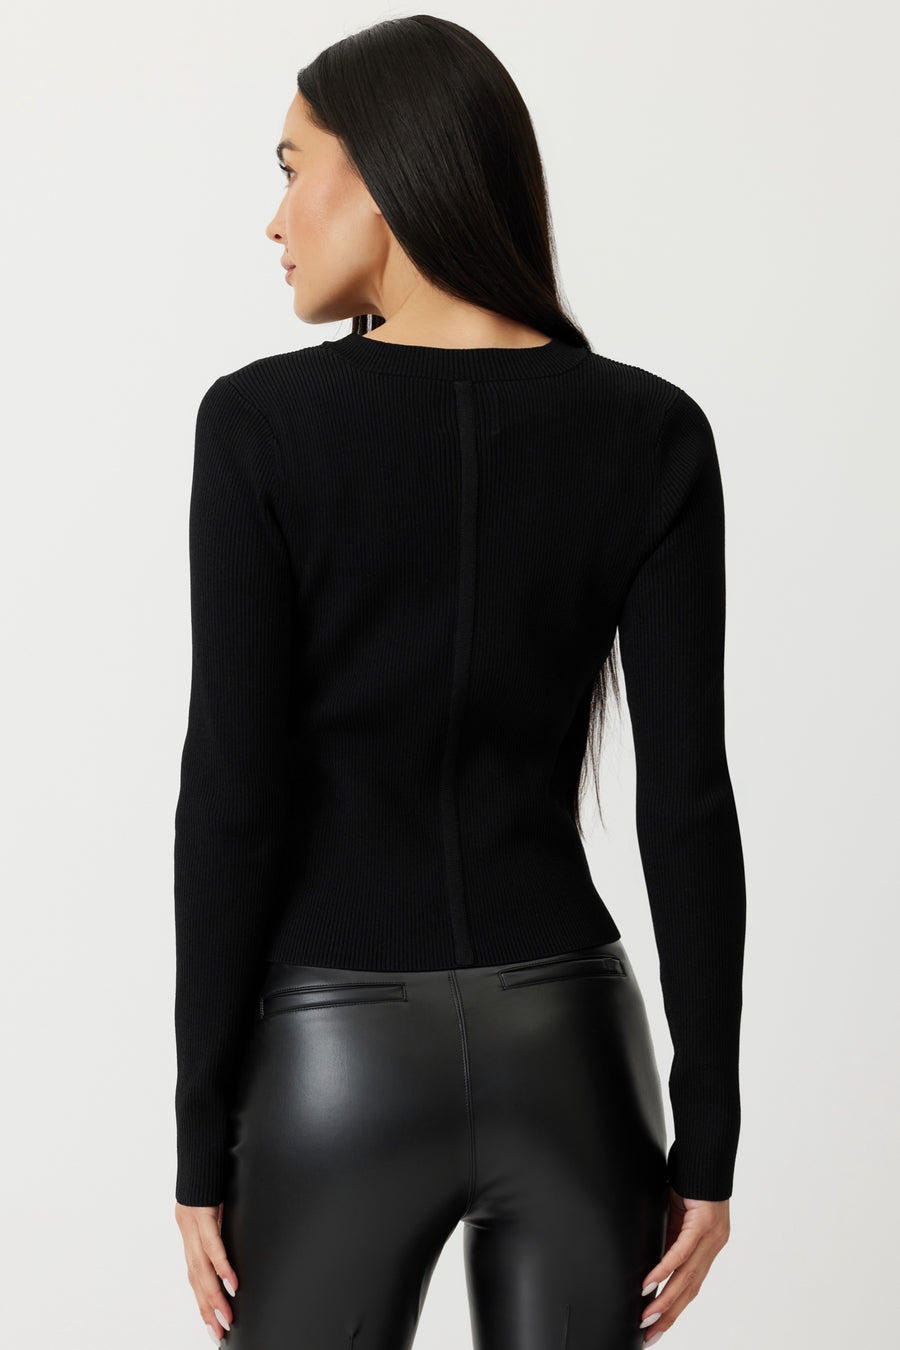 THE GREGORY LONG SLEEVE KNIT TOP - BLACK